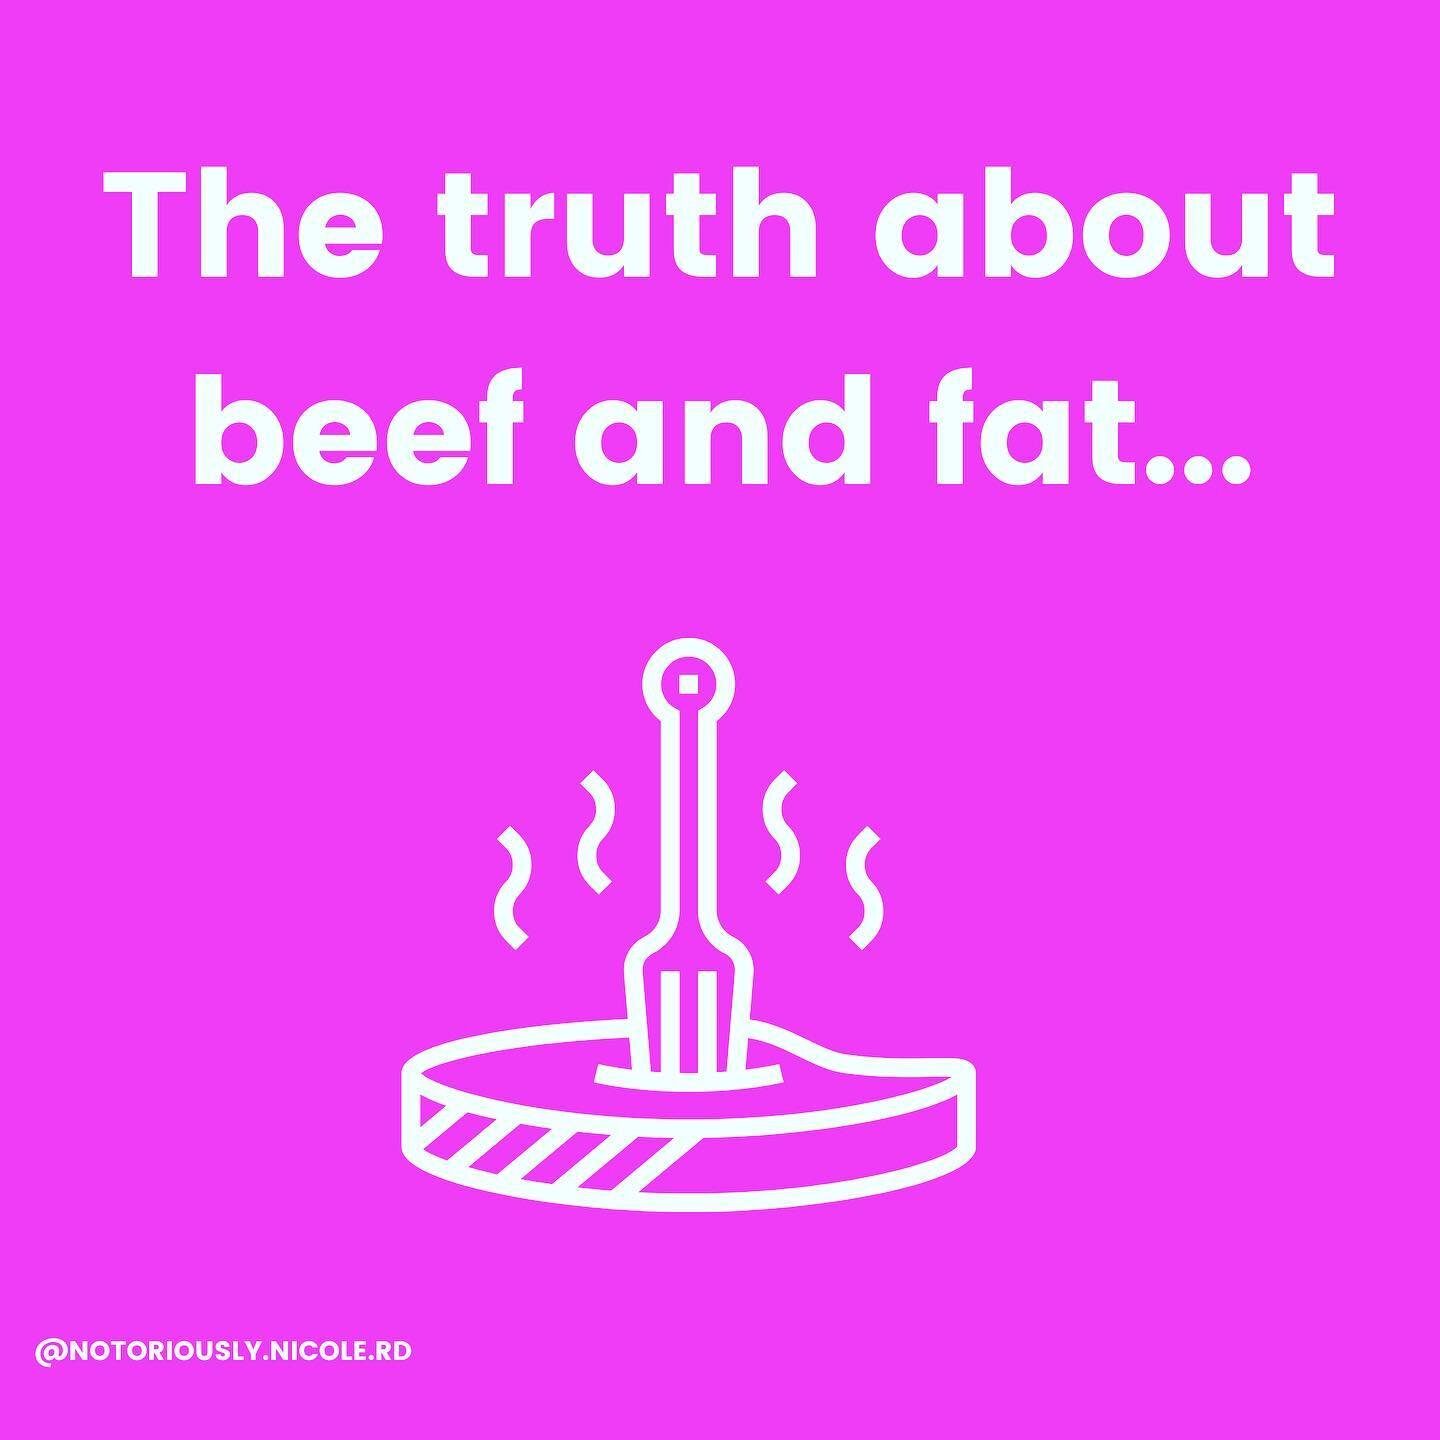 Questions about fat and 🥩? 
👀 this🔥 take ⬇️
.
.
.
.
.
1️⃣ fully understand if your 🤯: half the fatty acids in beef are monounsaturated - I felt the same when I learned this little 💎 in undergrad. We generally tend to equate all animal-derived fo